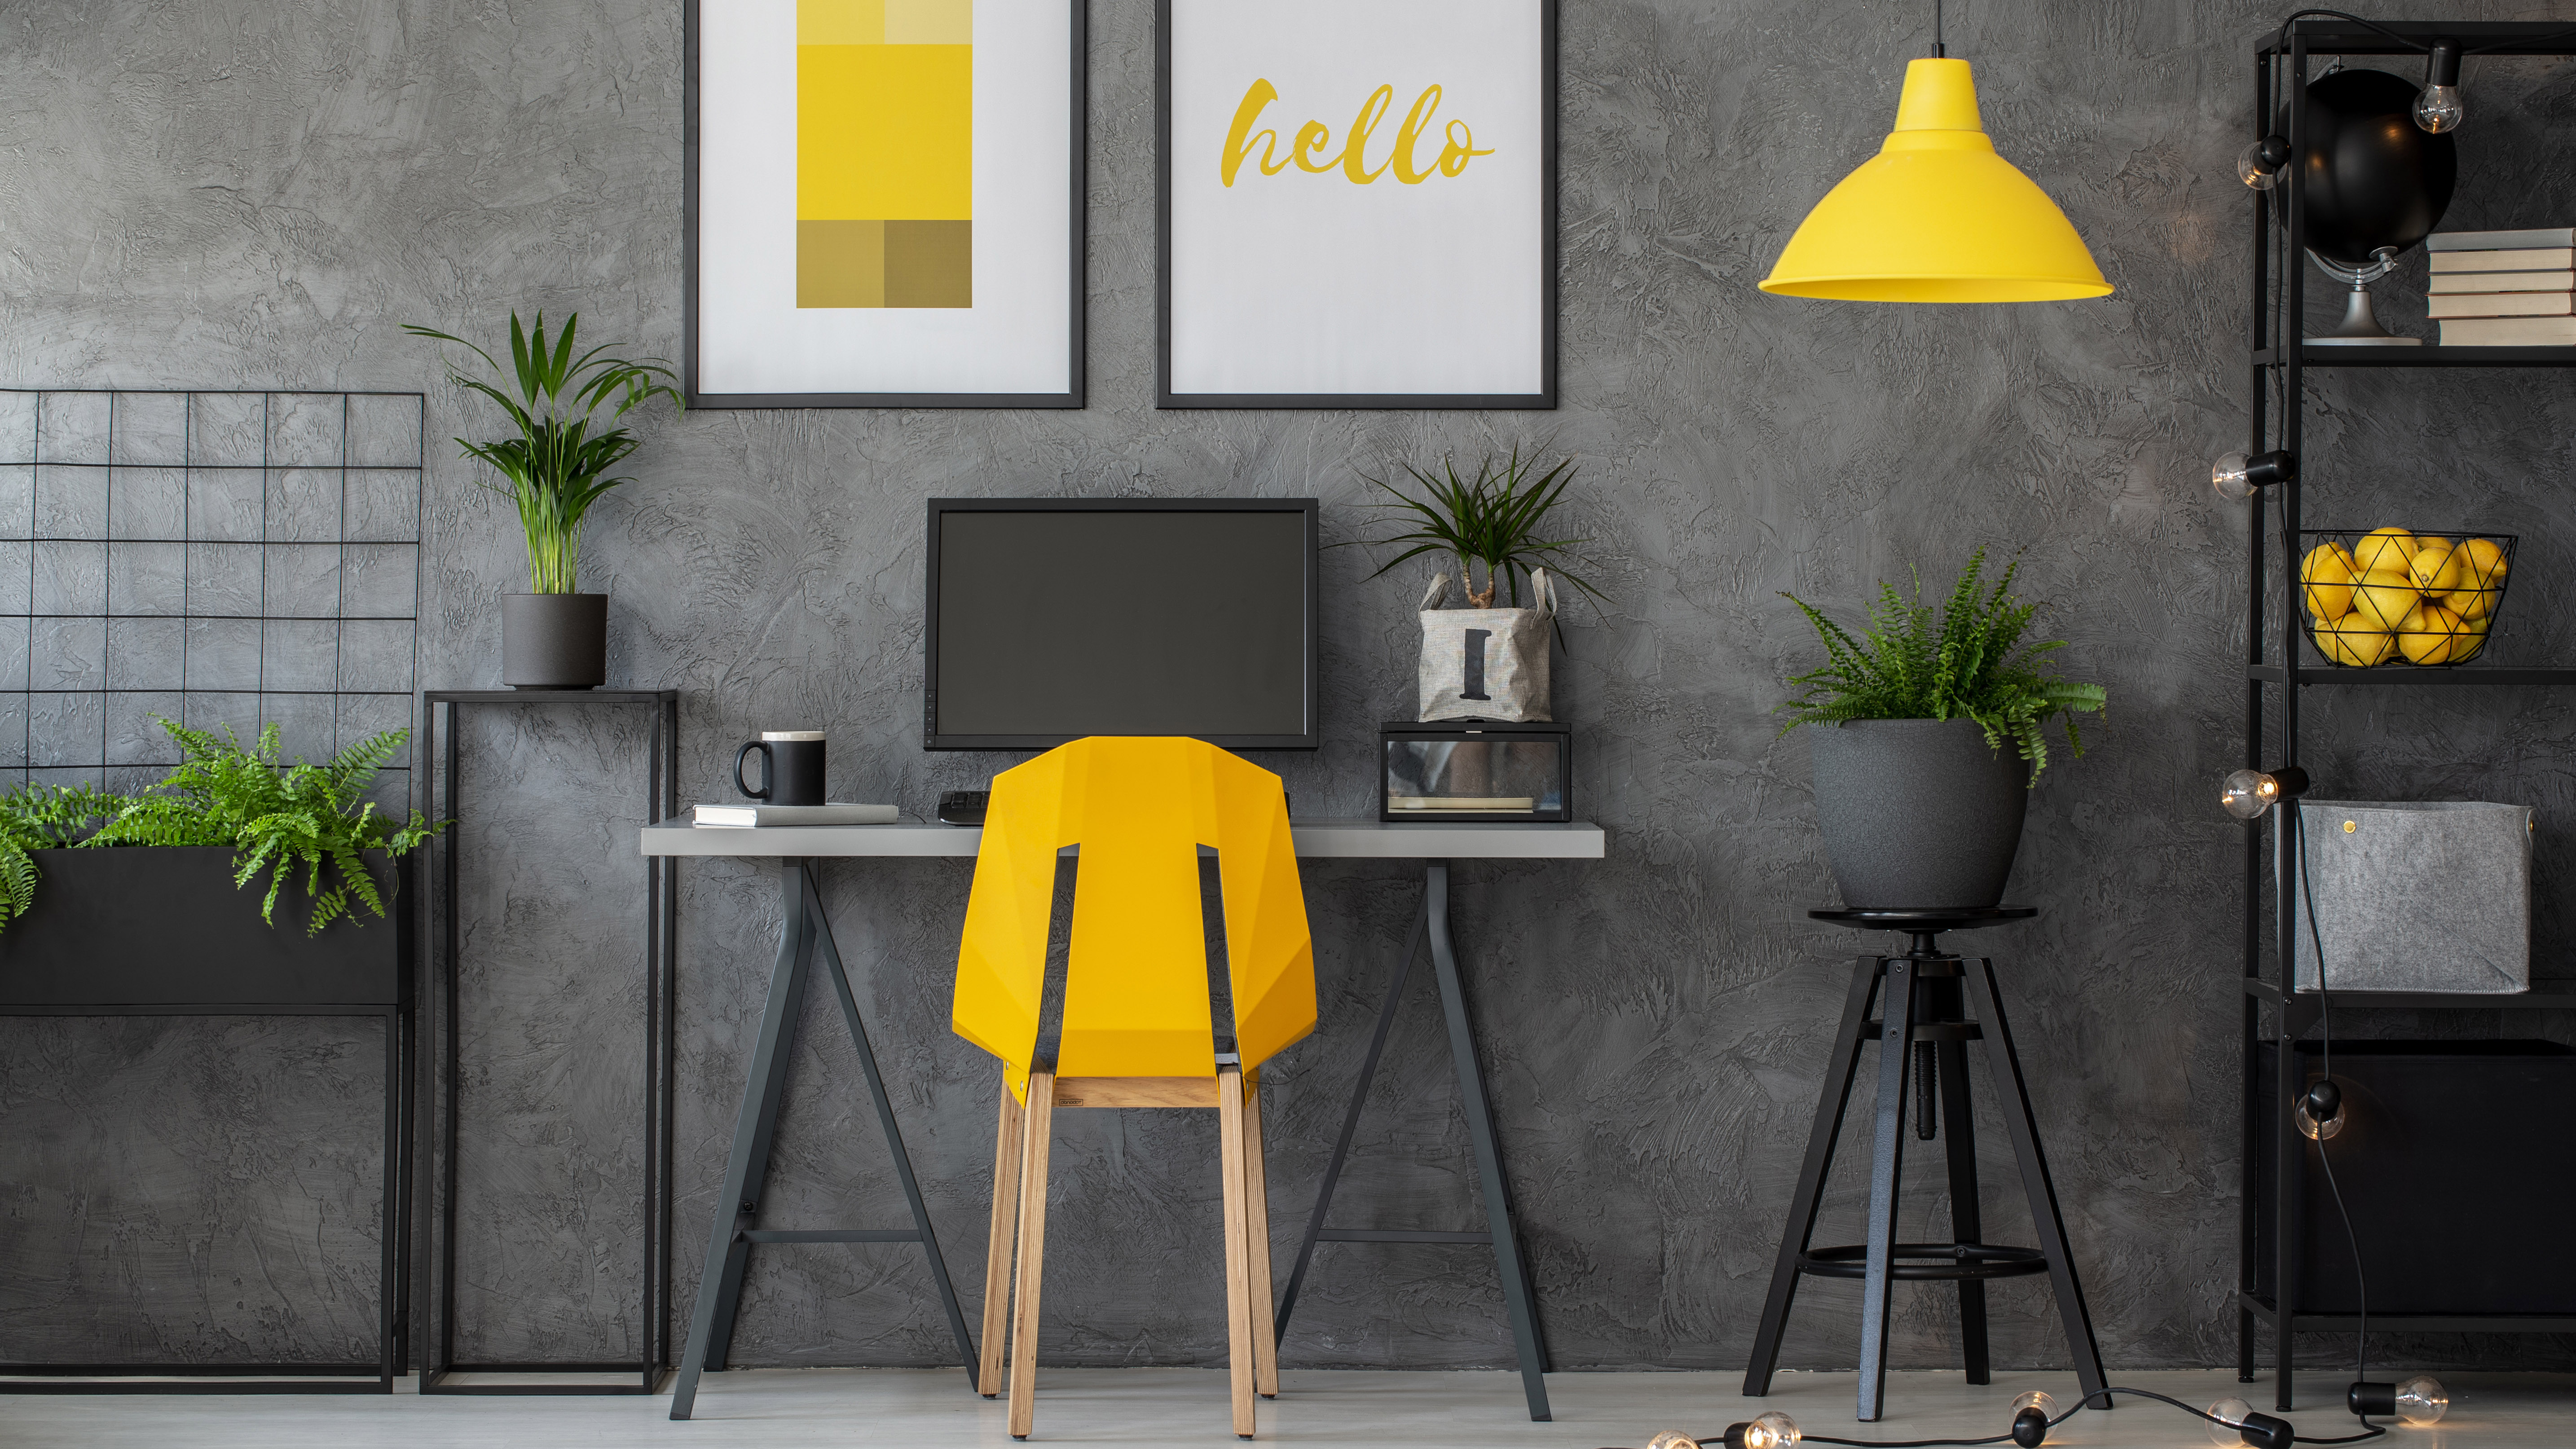 A dark grey themed home office with a yellow chair, lamp and lemons to decorate